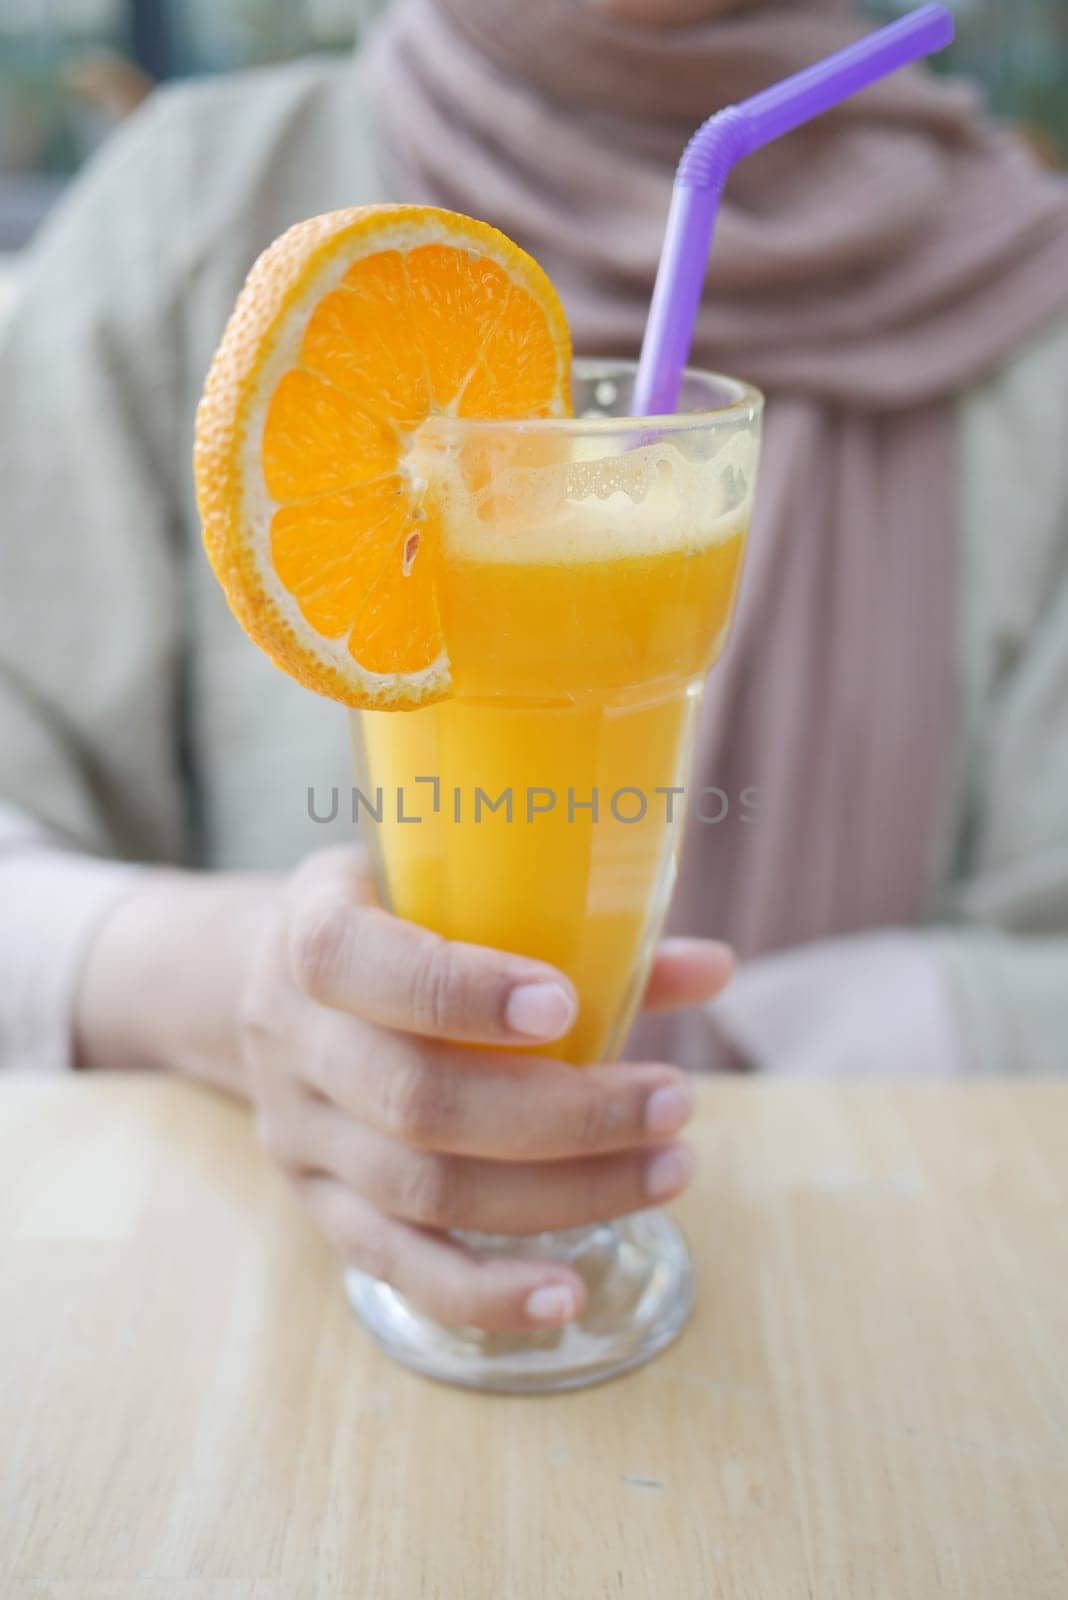 women holding a glass of orange juice by towfiq007